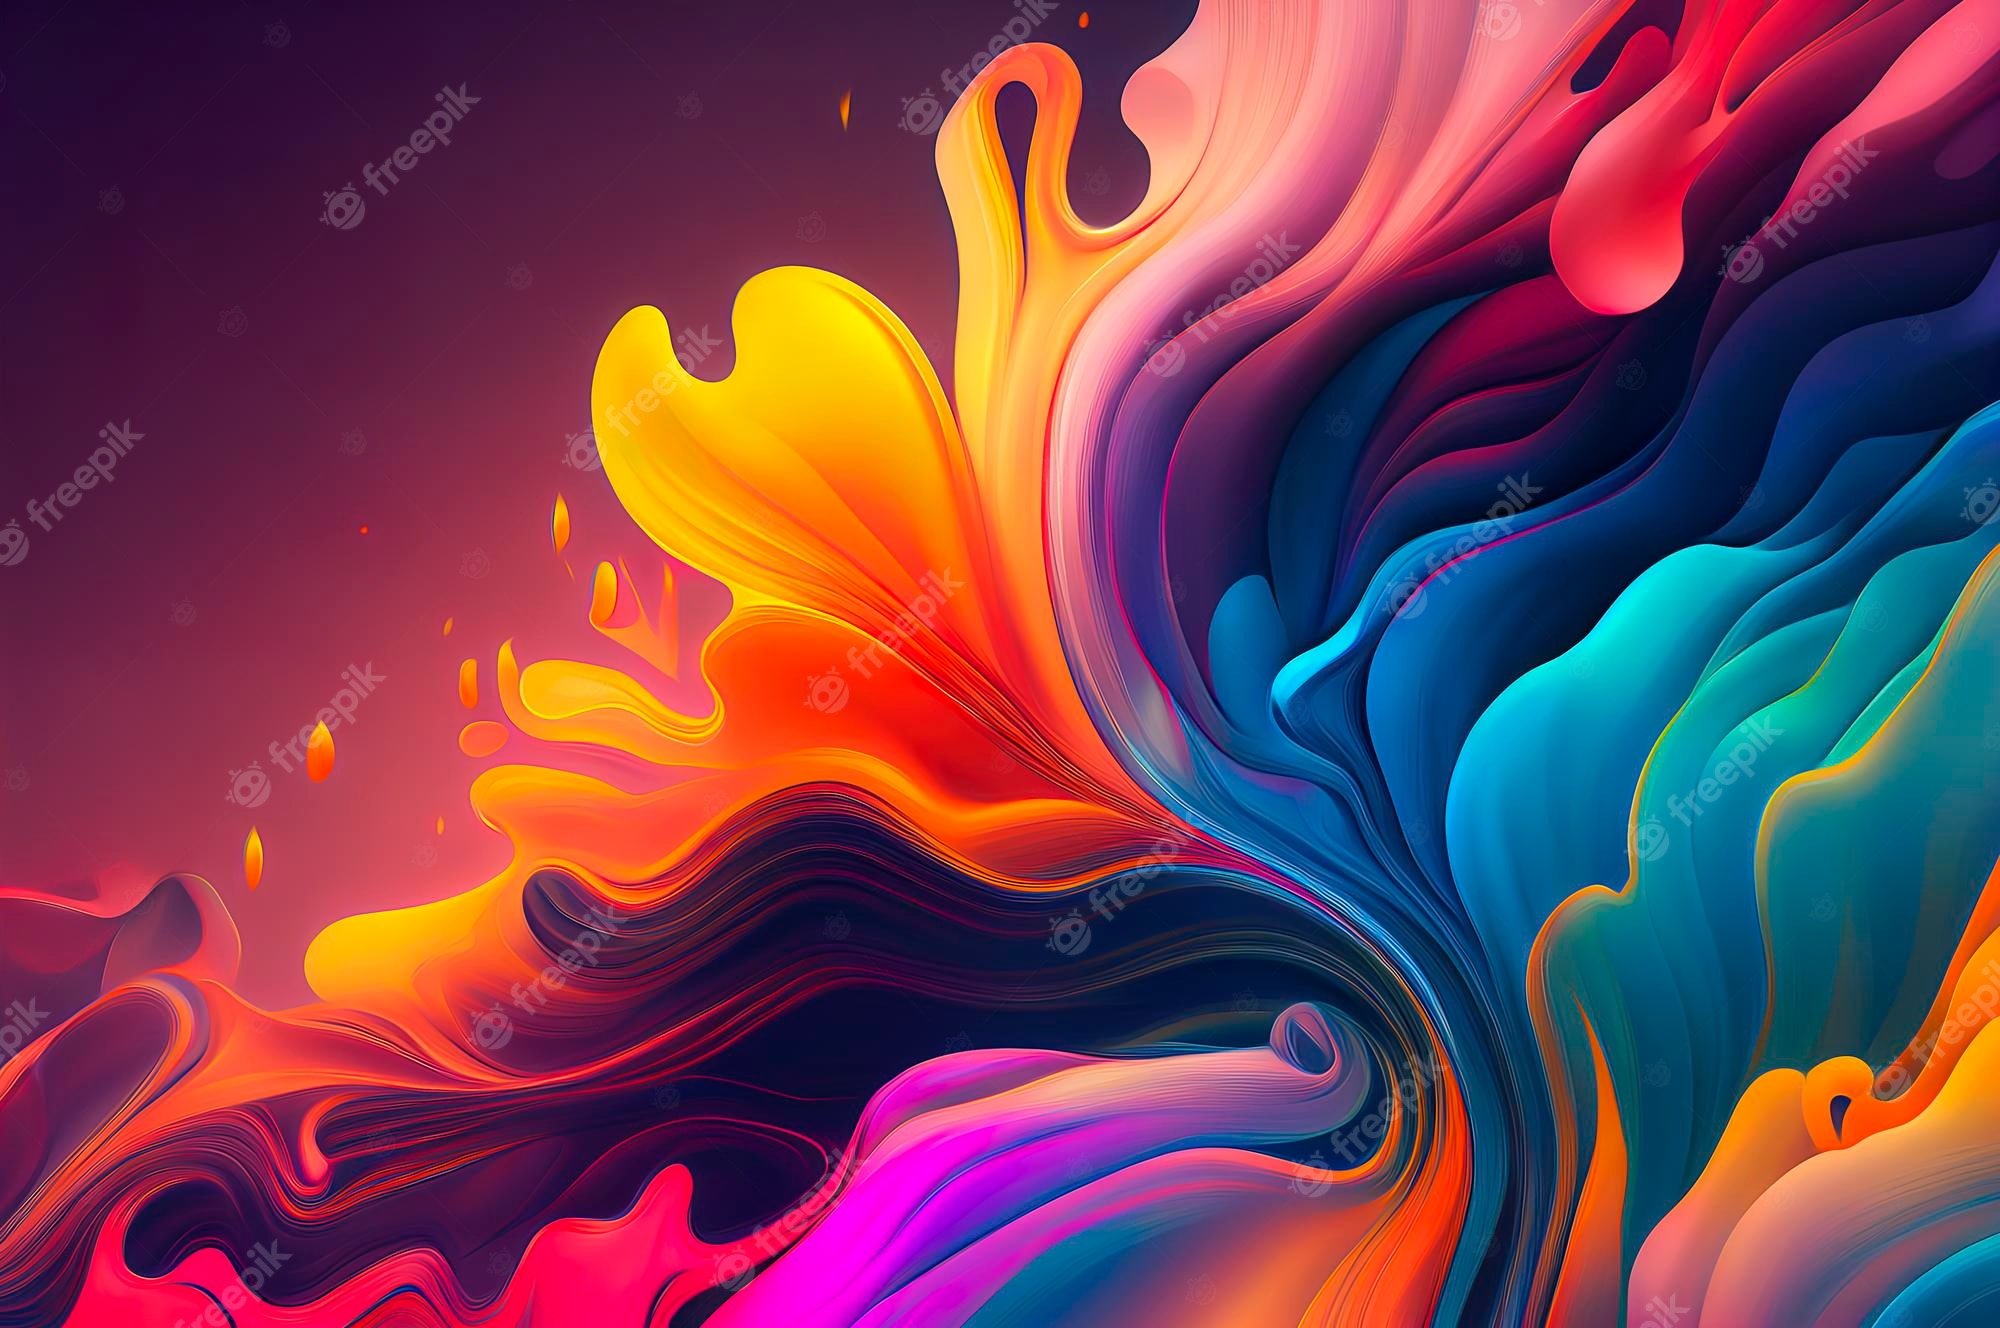 Multiple Colours Wallpapers - Wallpaper Cave